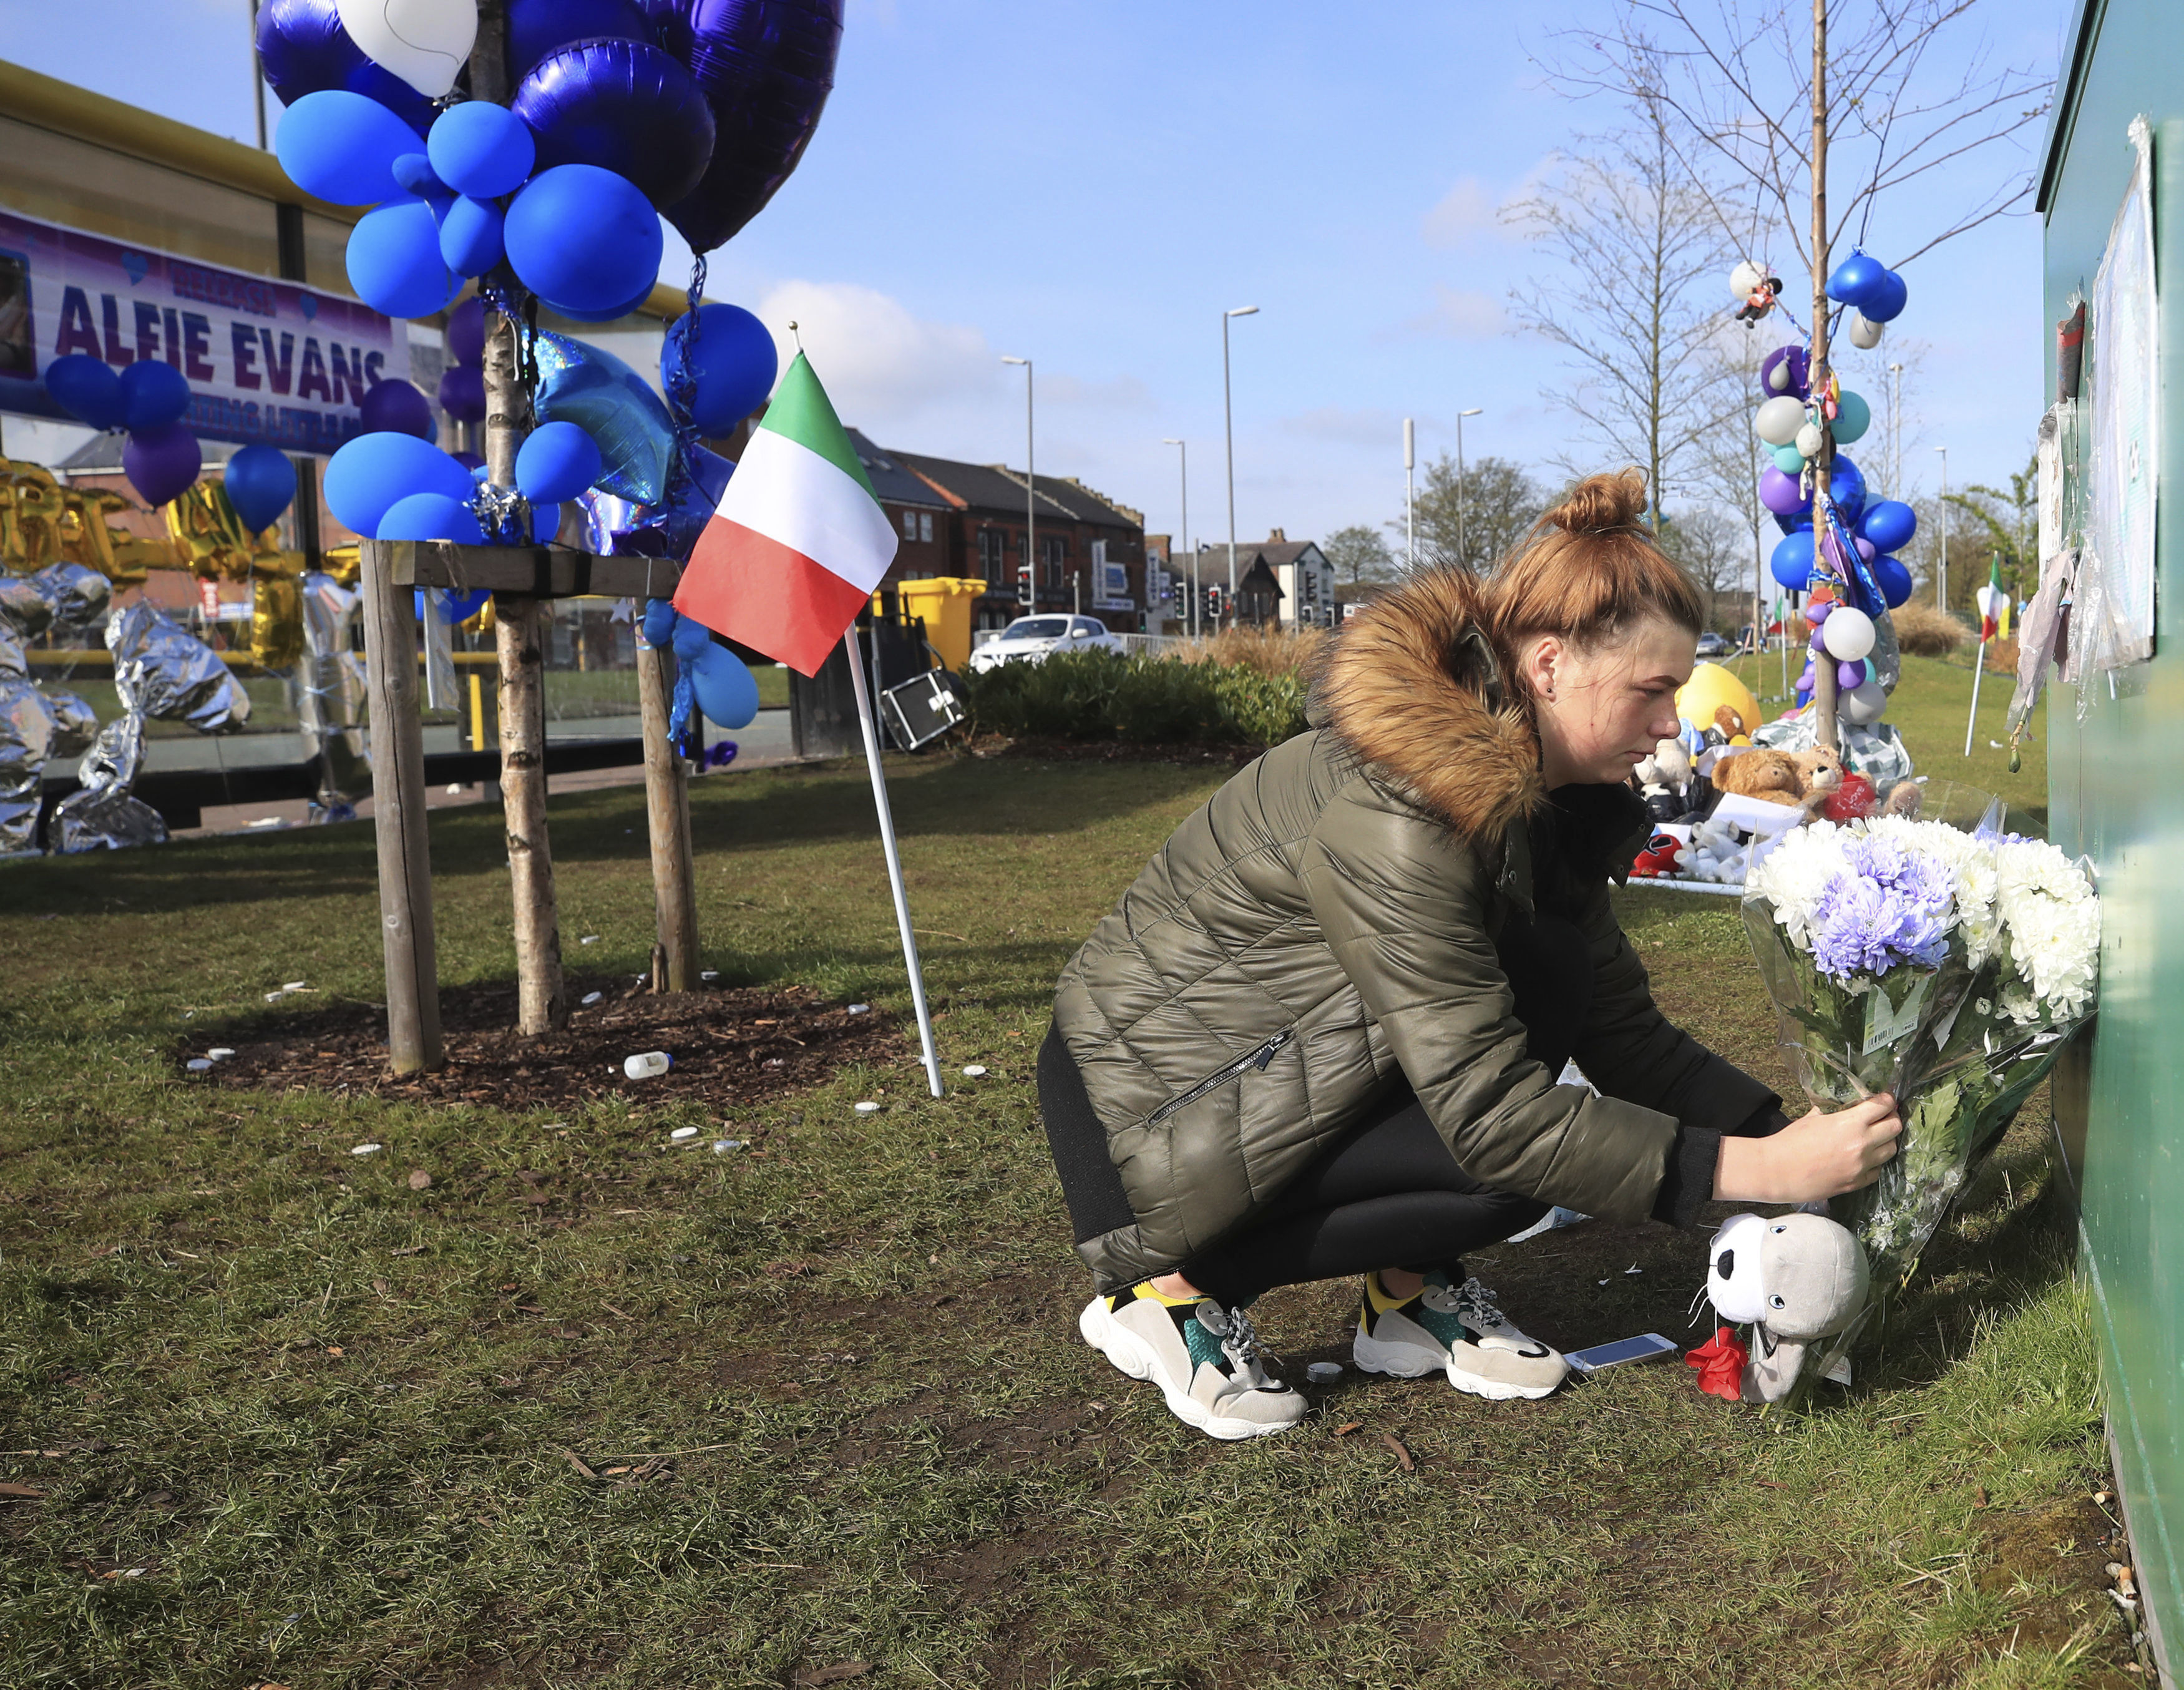 A woman leaves flowers outside Alder Hey Children's Hospital in Liverpool, England, following the death of 23-month-old, Alfie Evans, Saturday April 28, 2018. Alfie Evans, the sick British toddler whose parents won support from Pope Francis during a protracted legal battle over his treatment, died early Saturday. He was 23 months old. (Peter Byrne/PA via AP)